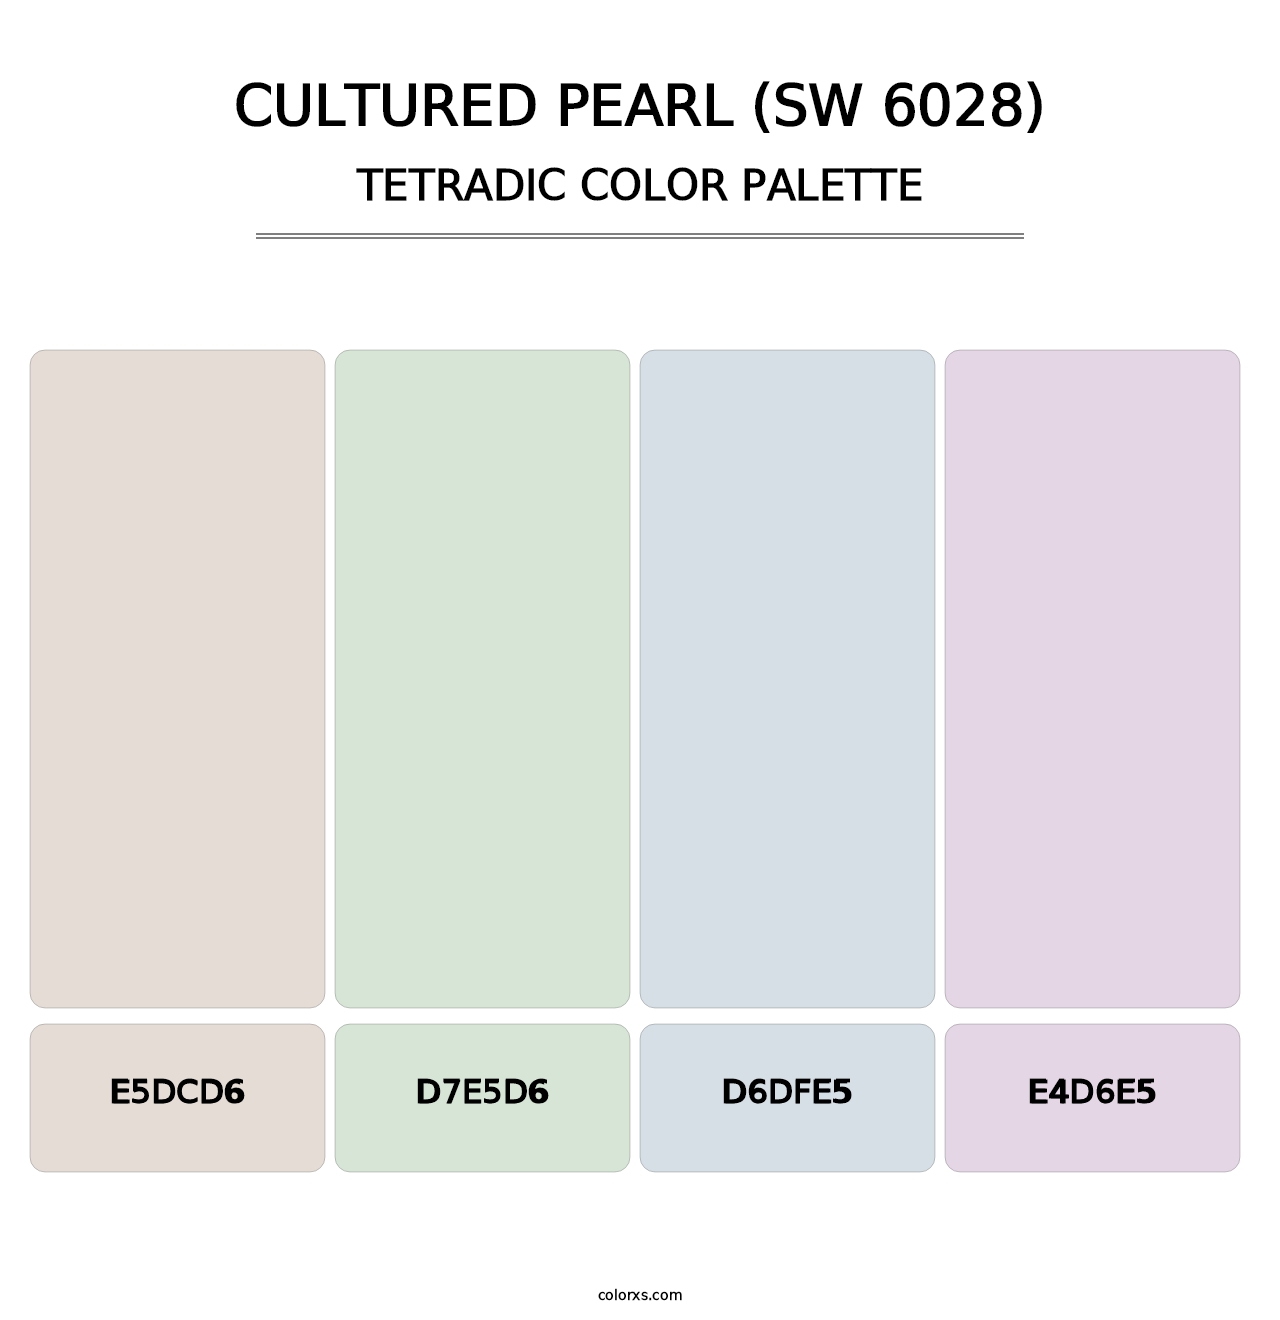 Cultured Pearl (SW 6028) - Tetradic Color Palette